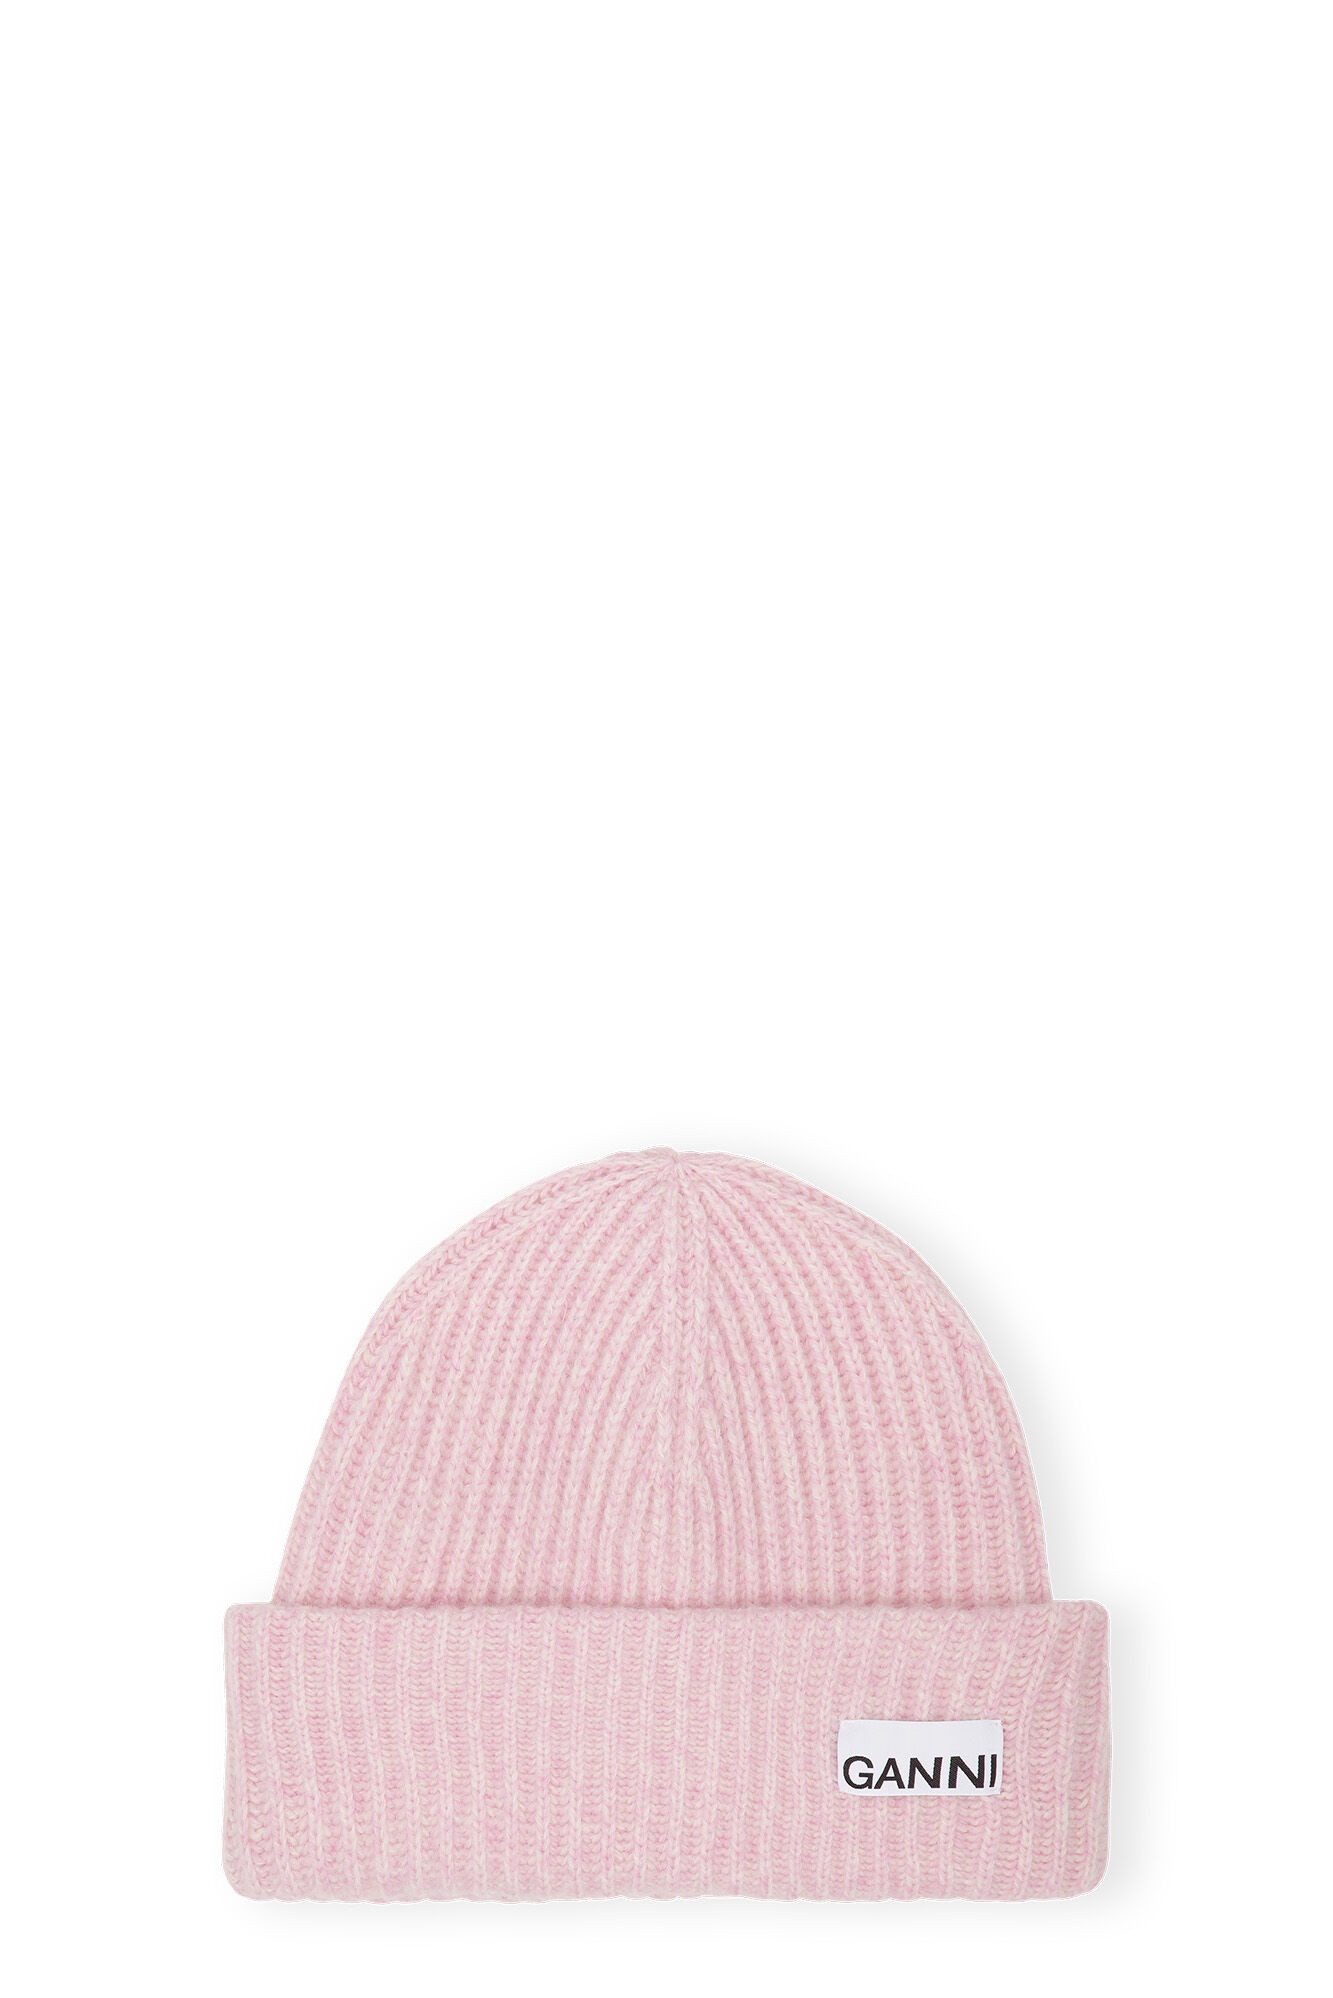 LIGHT PINK FITTED RIB KNIT WOOL BEANIE - 1